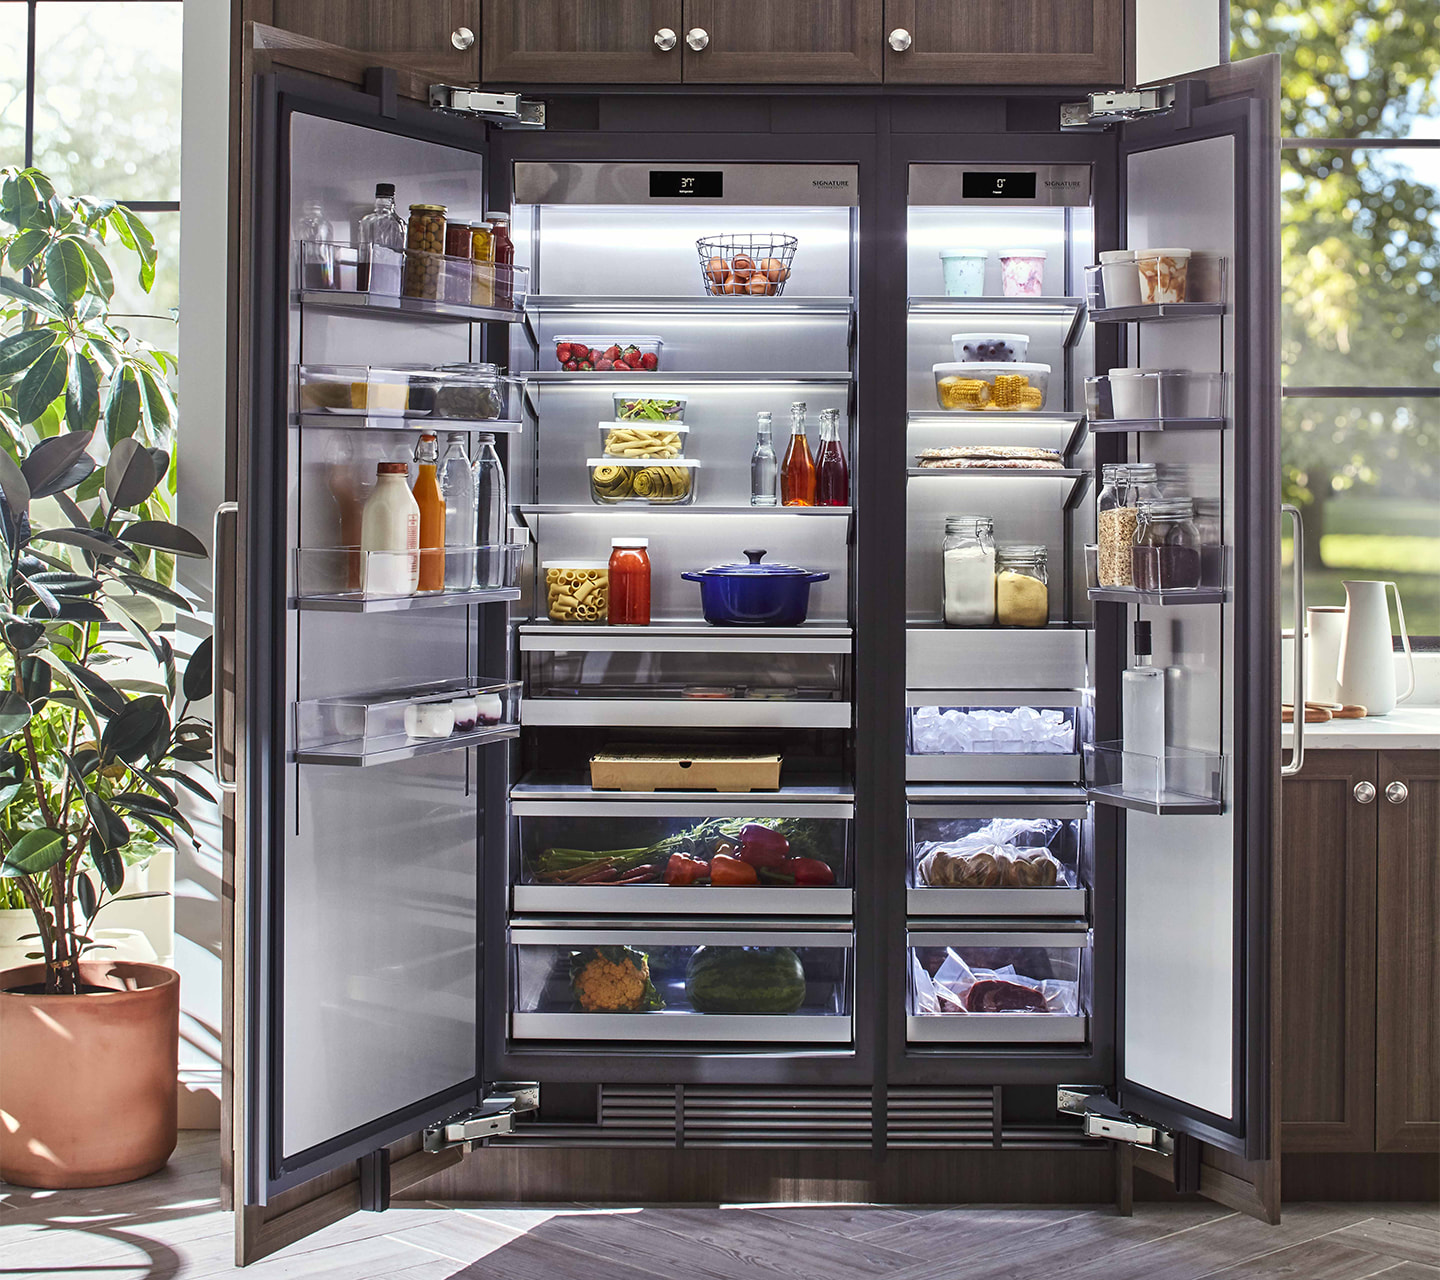 What Refrigerator Brand is the Most Reliable? Rated